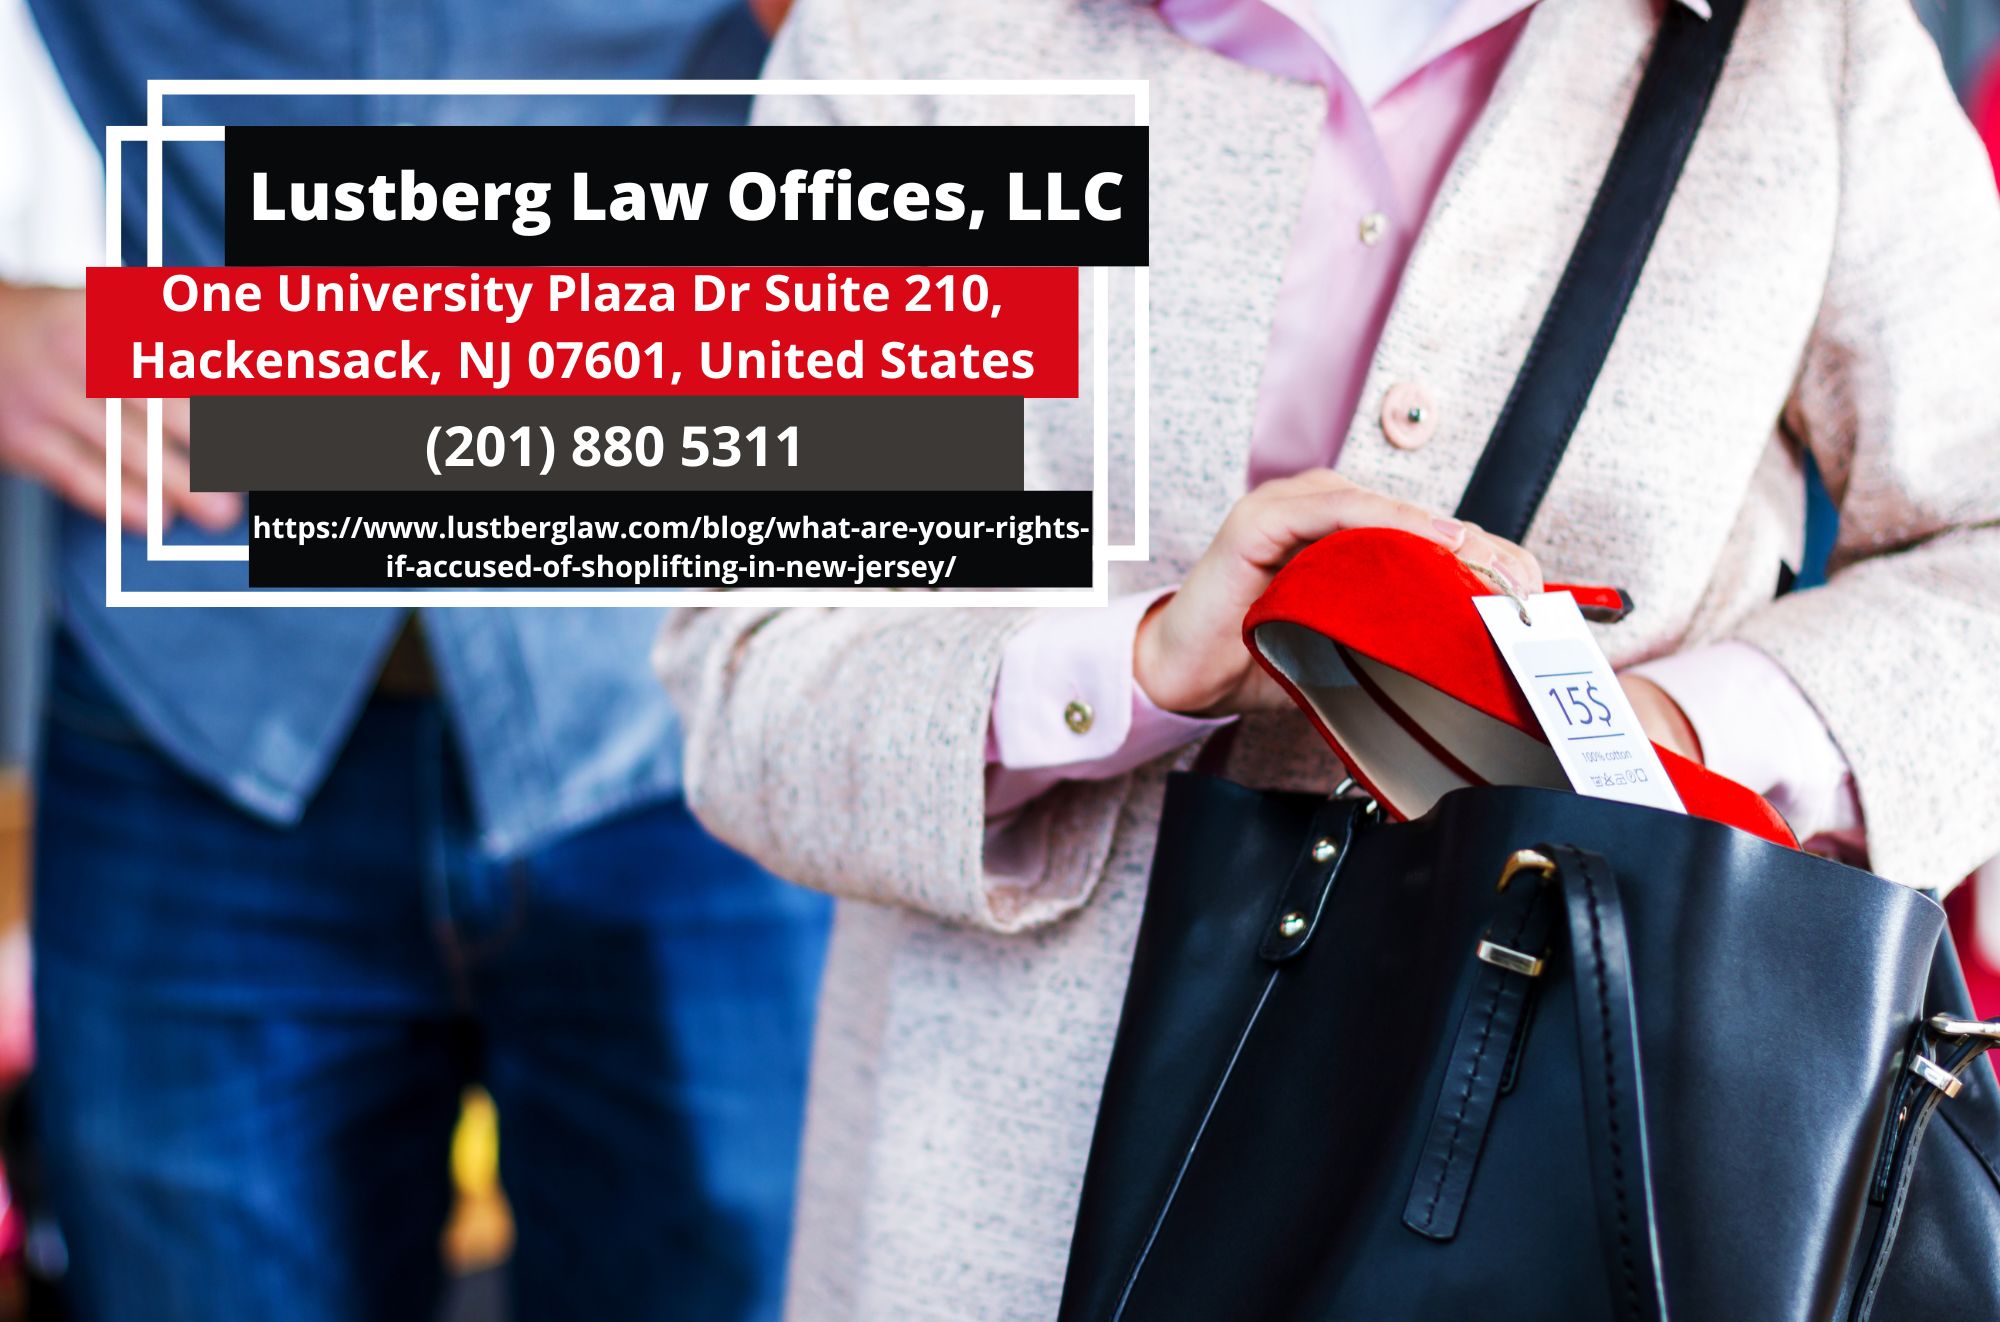 New Jersey Shoplifting Attorney Adam H. Lustberg Releases Informative Article on Shoplifting Rights